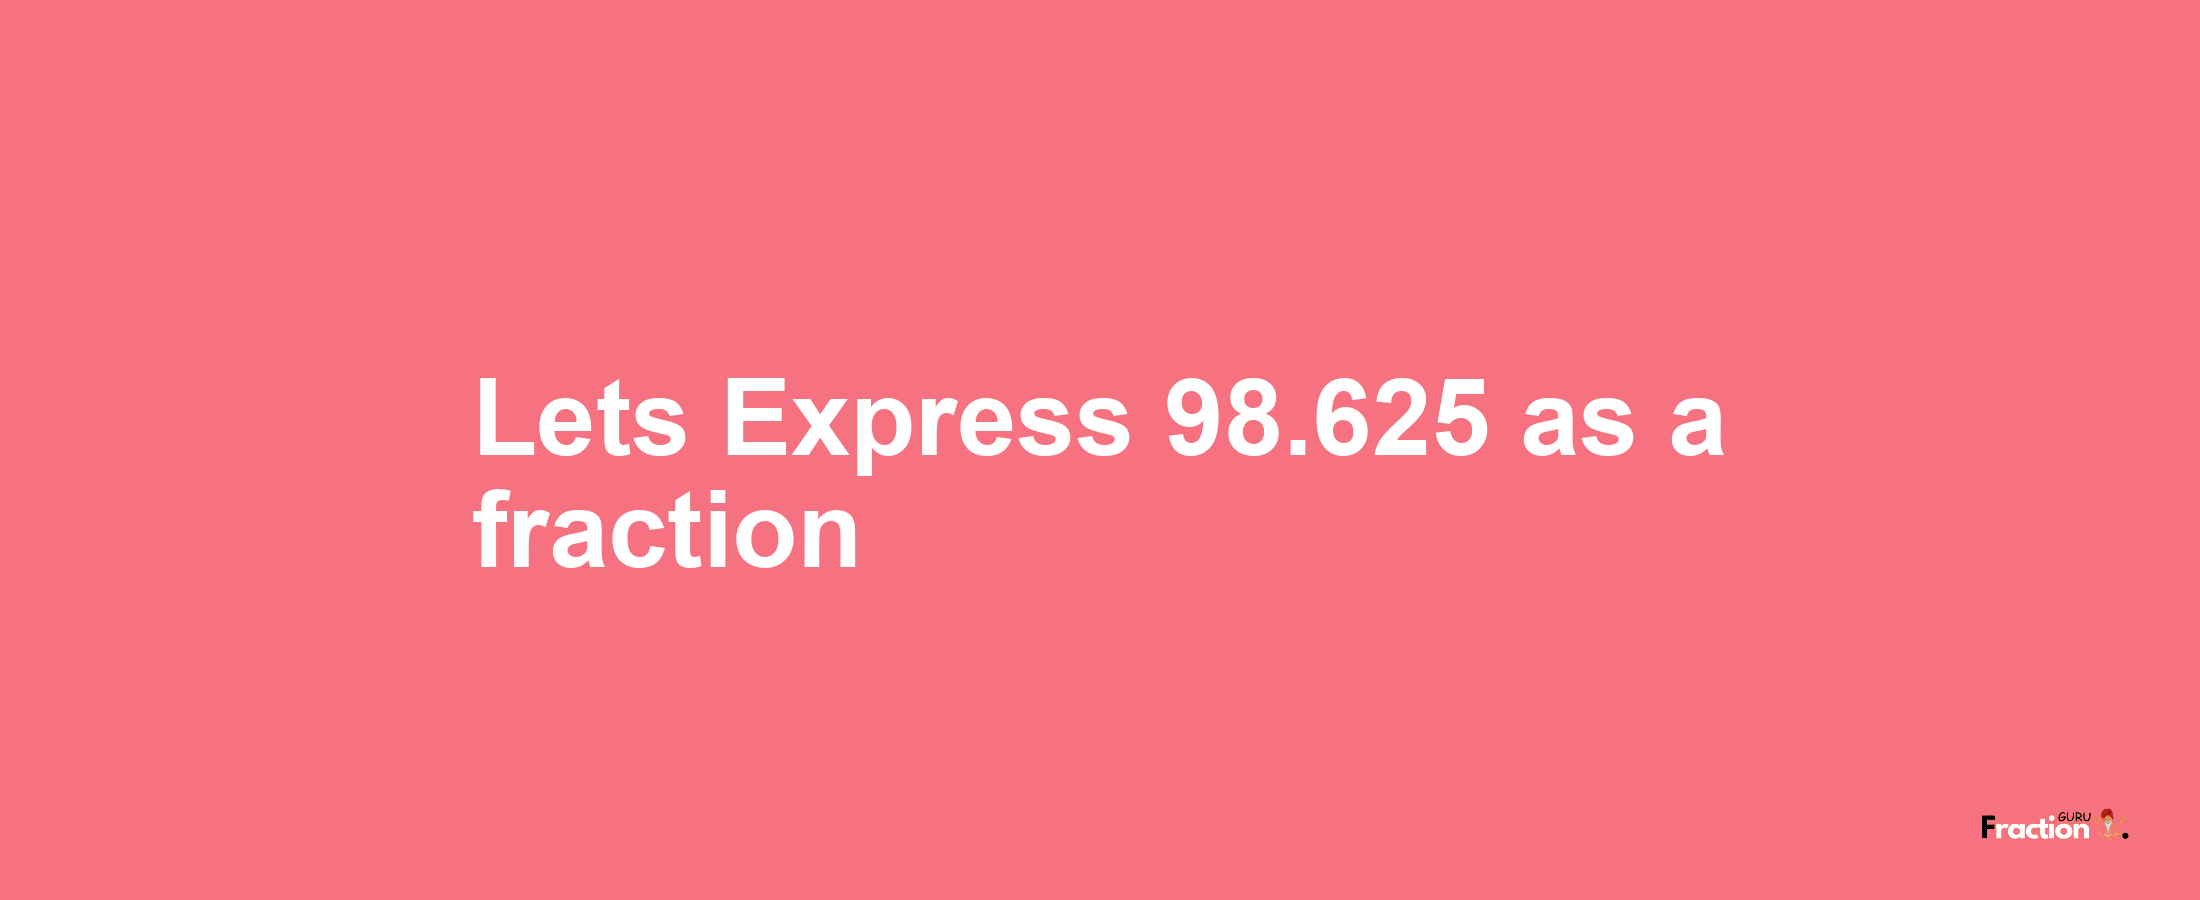 Lets Express 98.625 as afraction